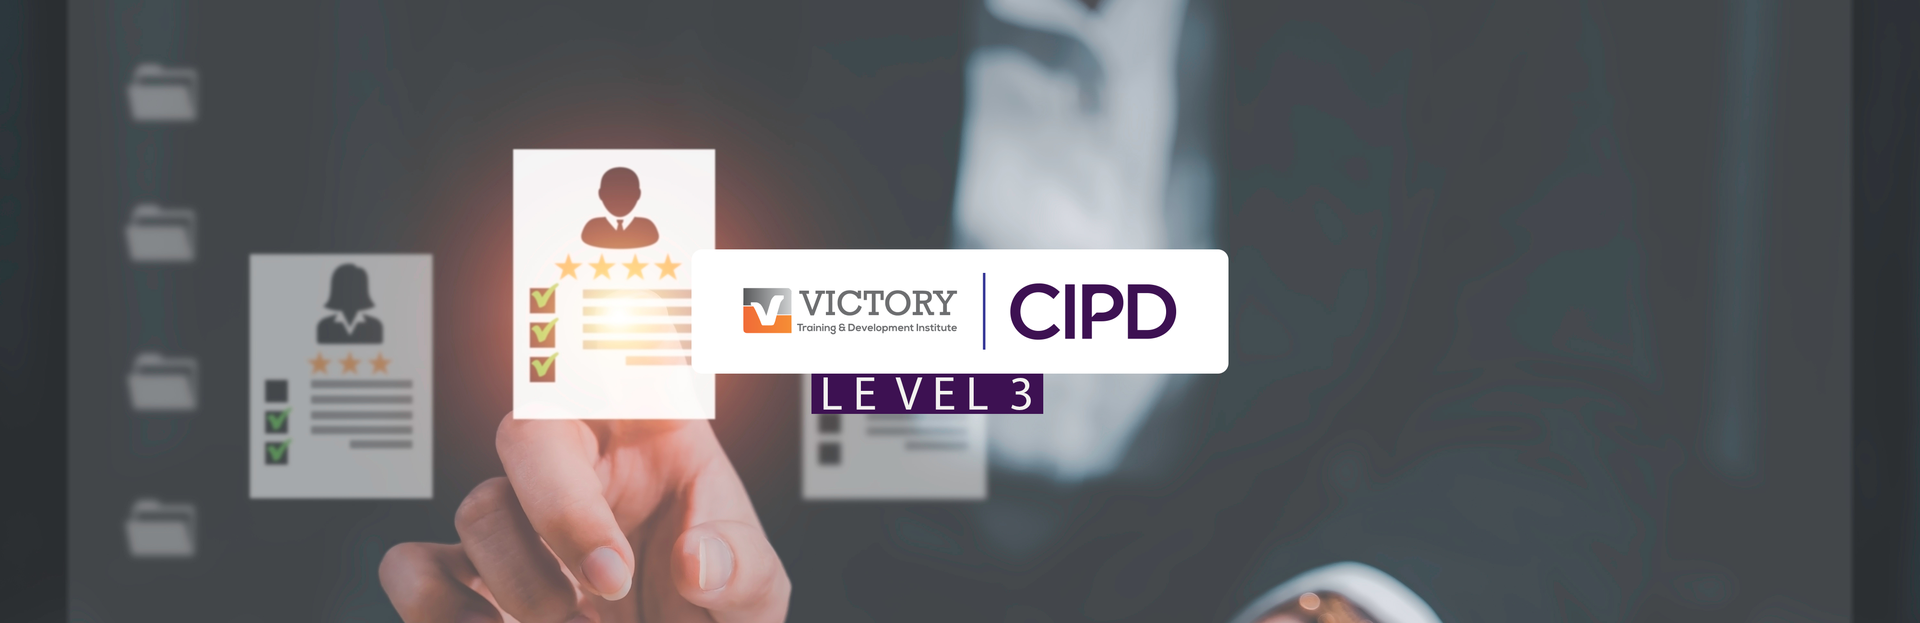 CIPD Level 3 - Foundation Certificate in People Practice